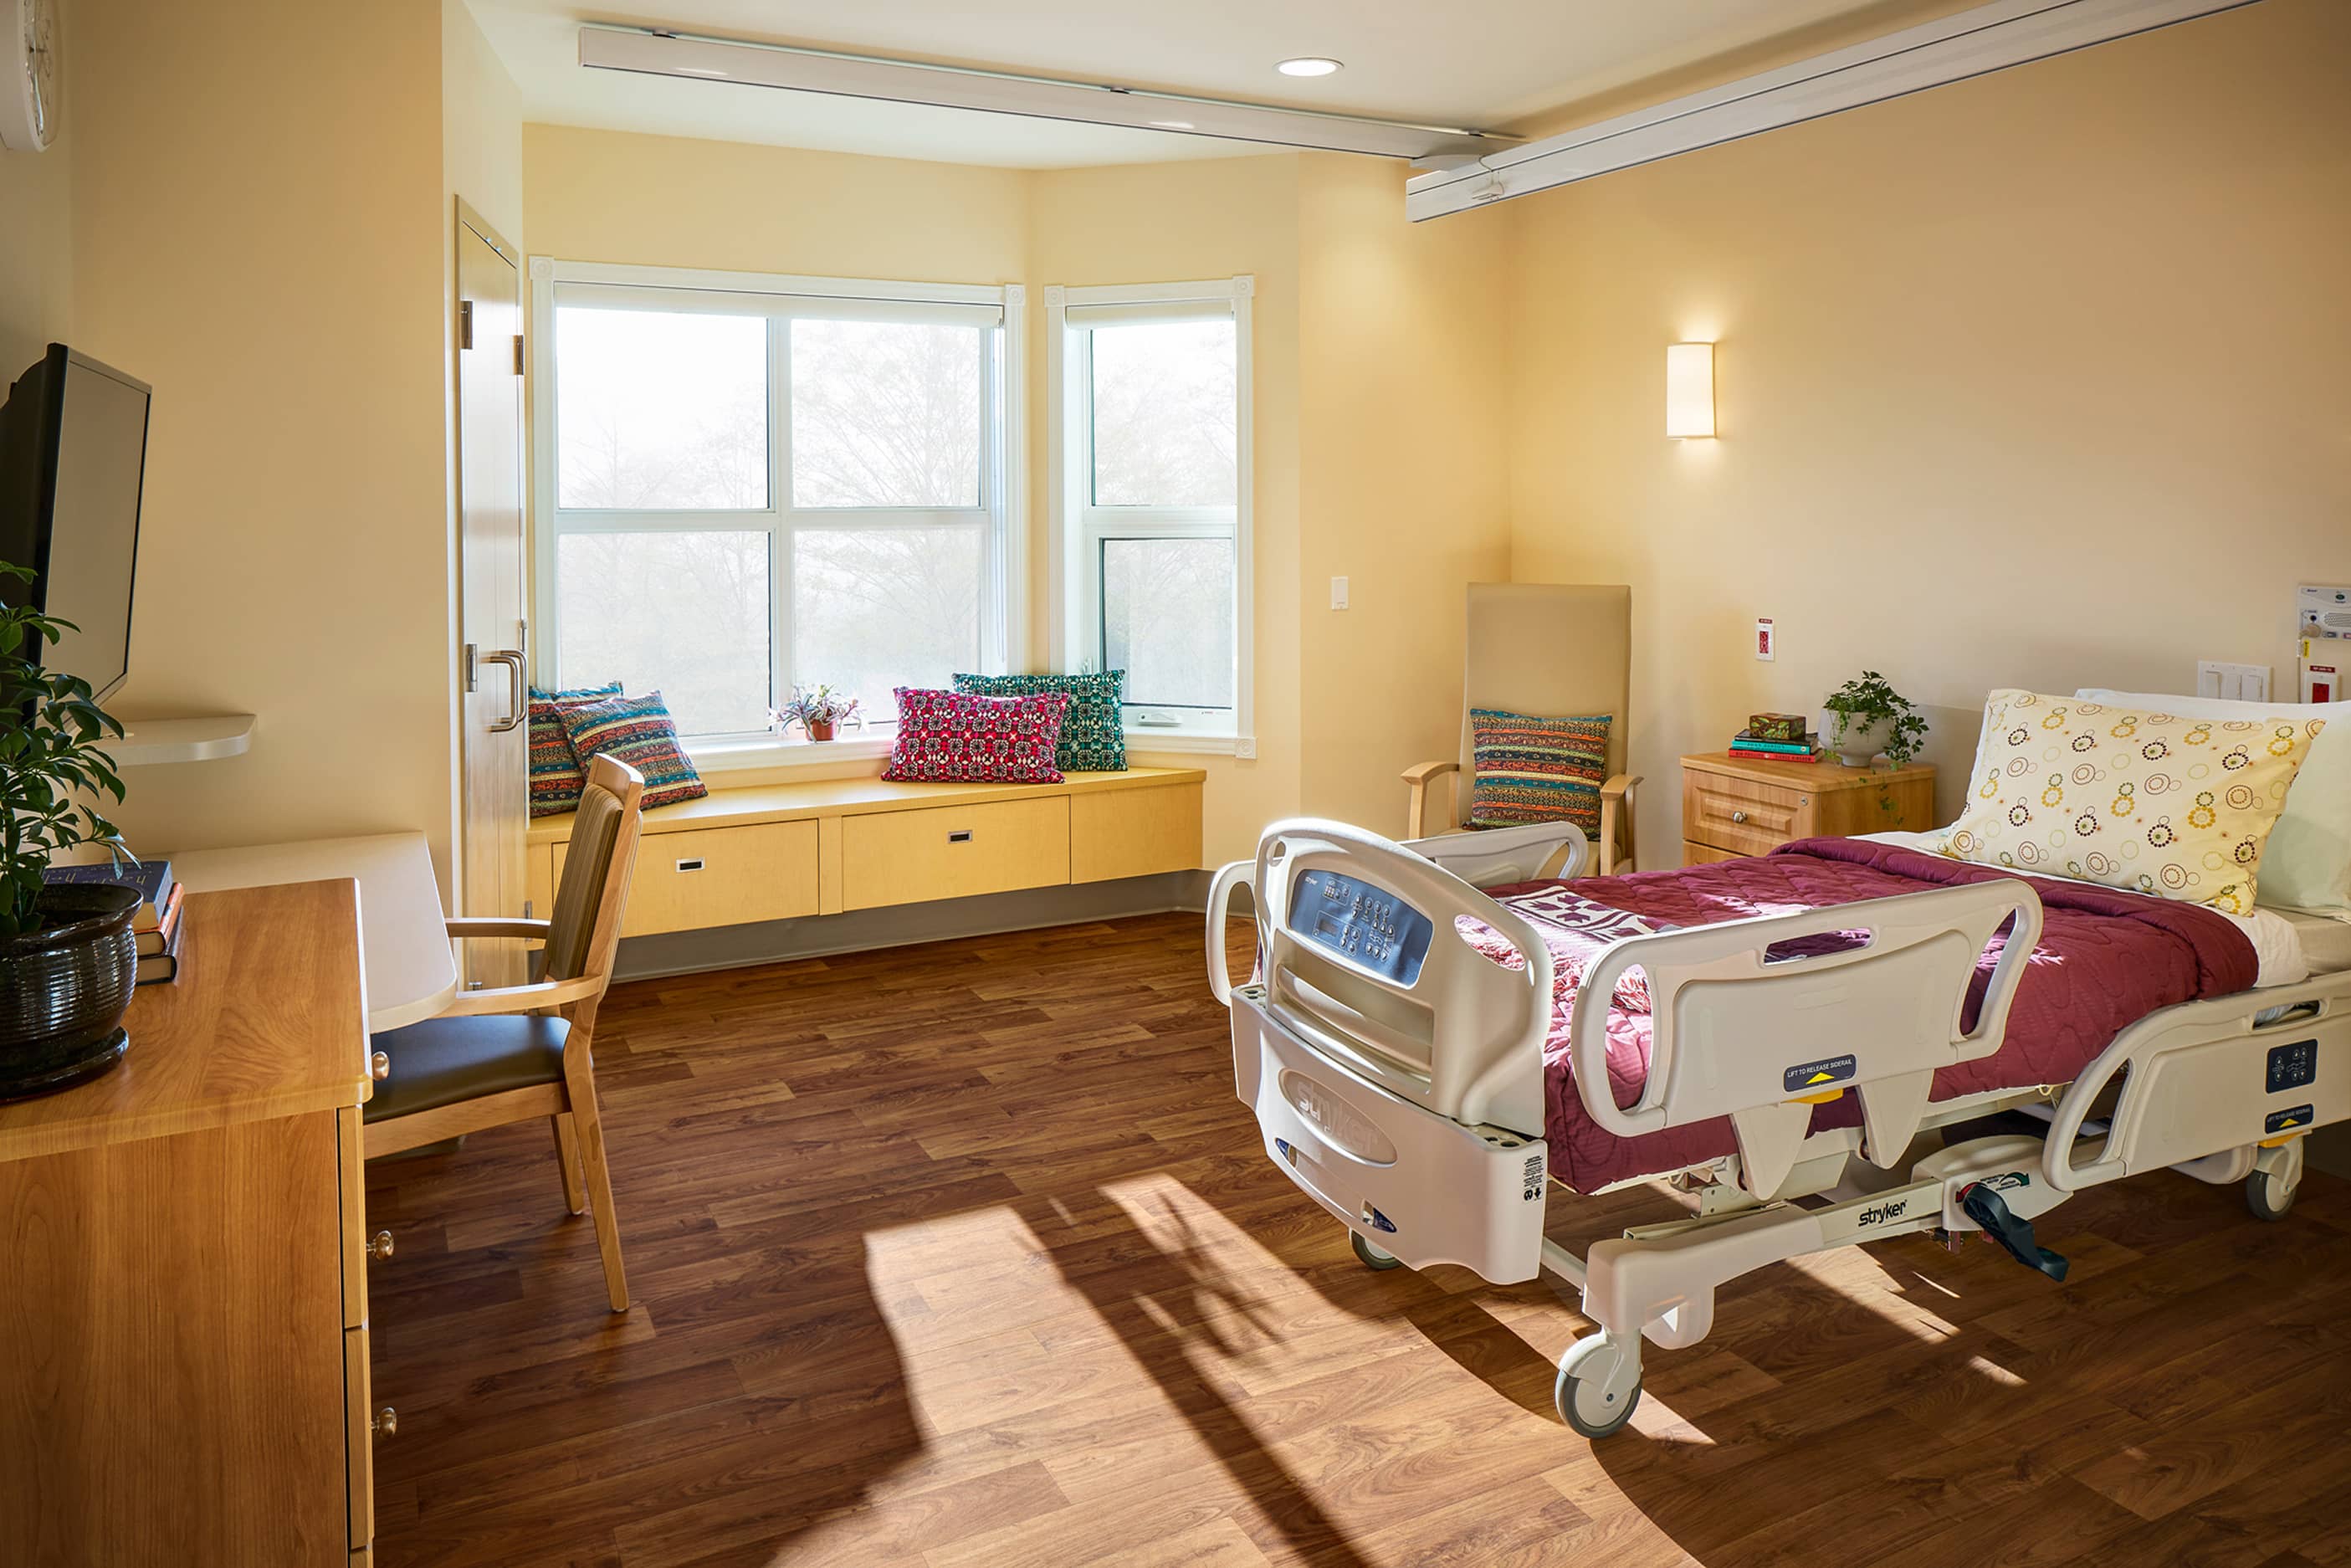 bbp whistle bend continuing care facility room